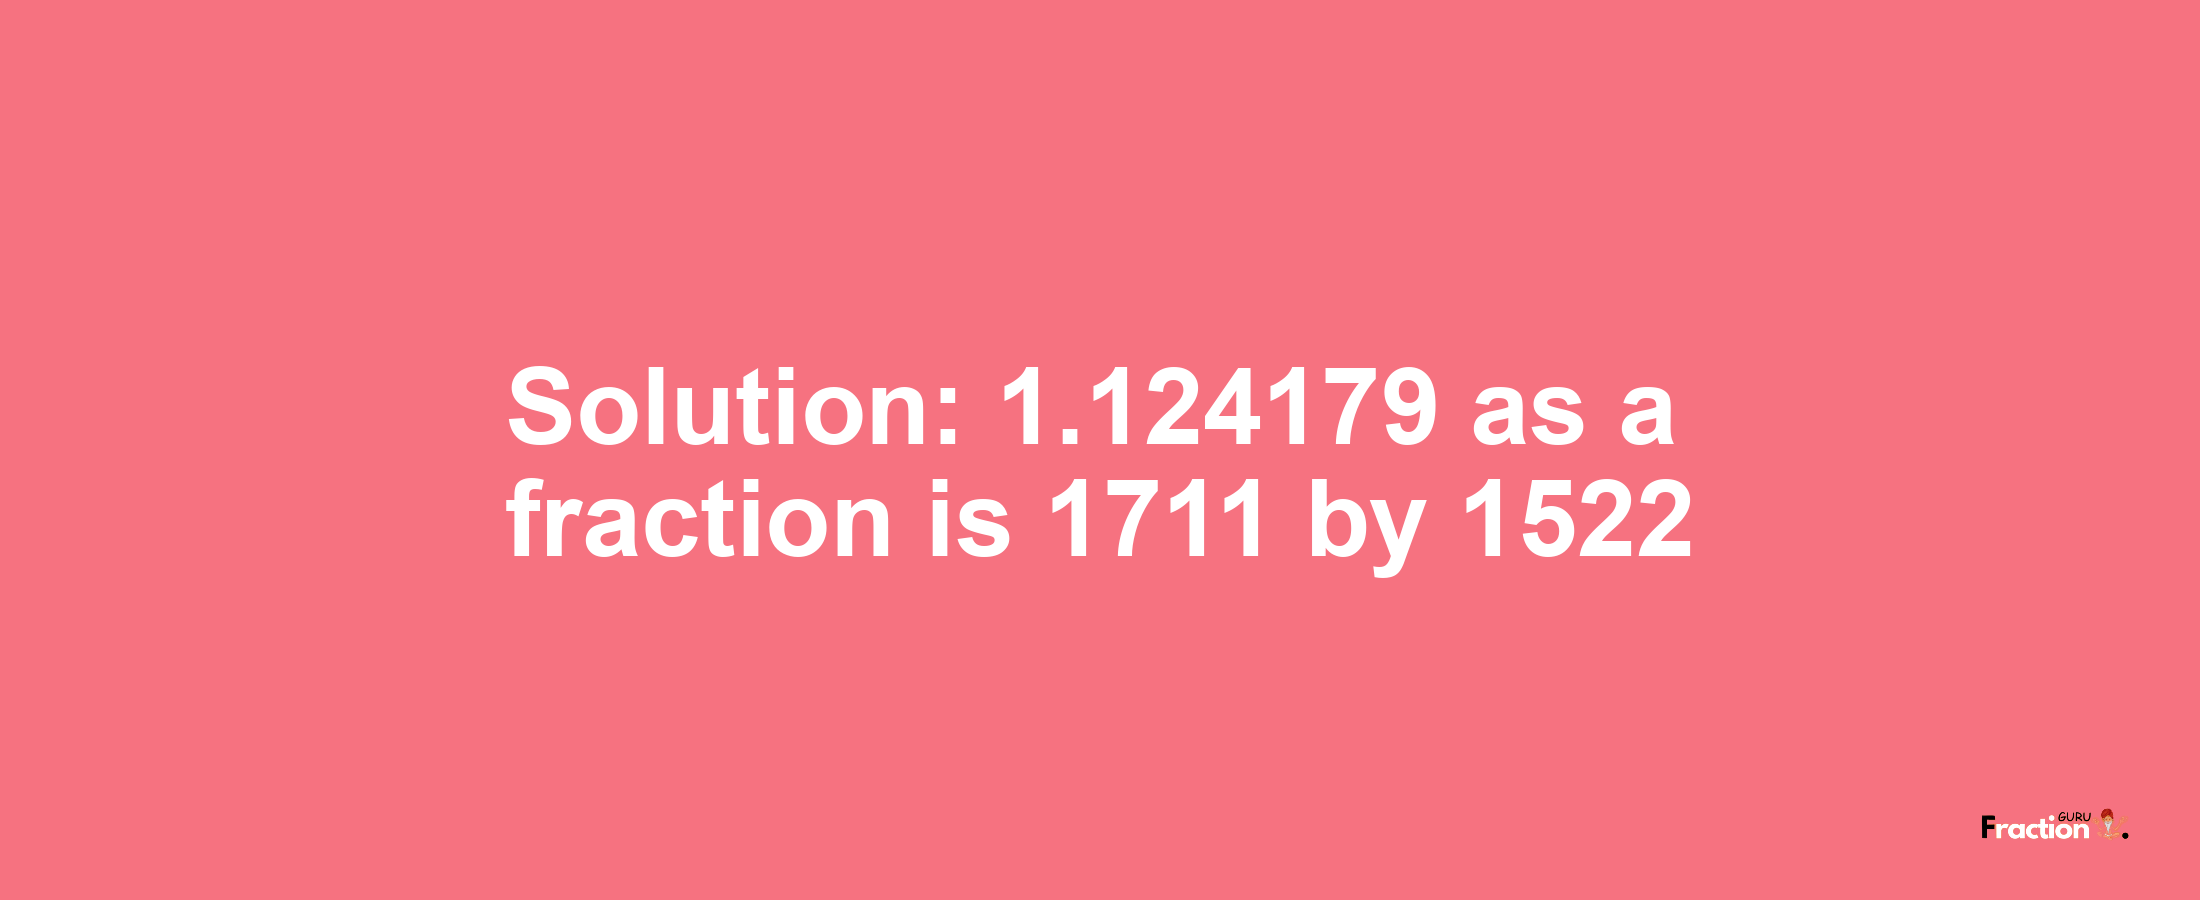 Solution:1.124179 as a fraction is 1711/1522